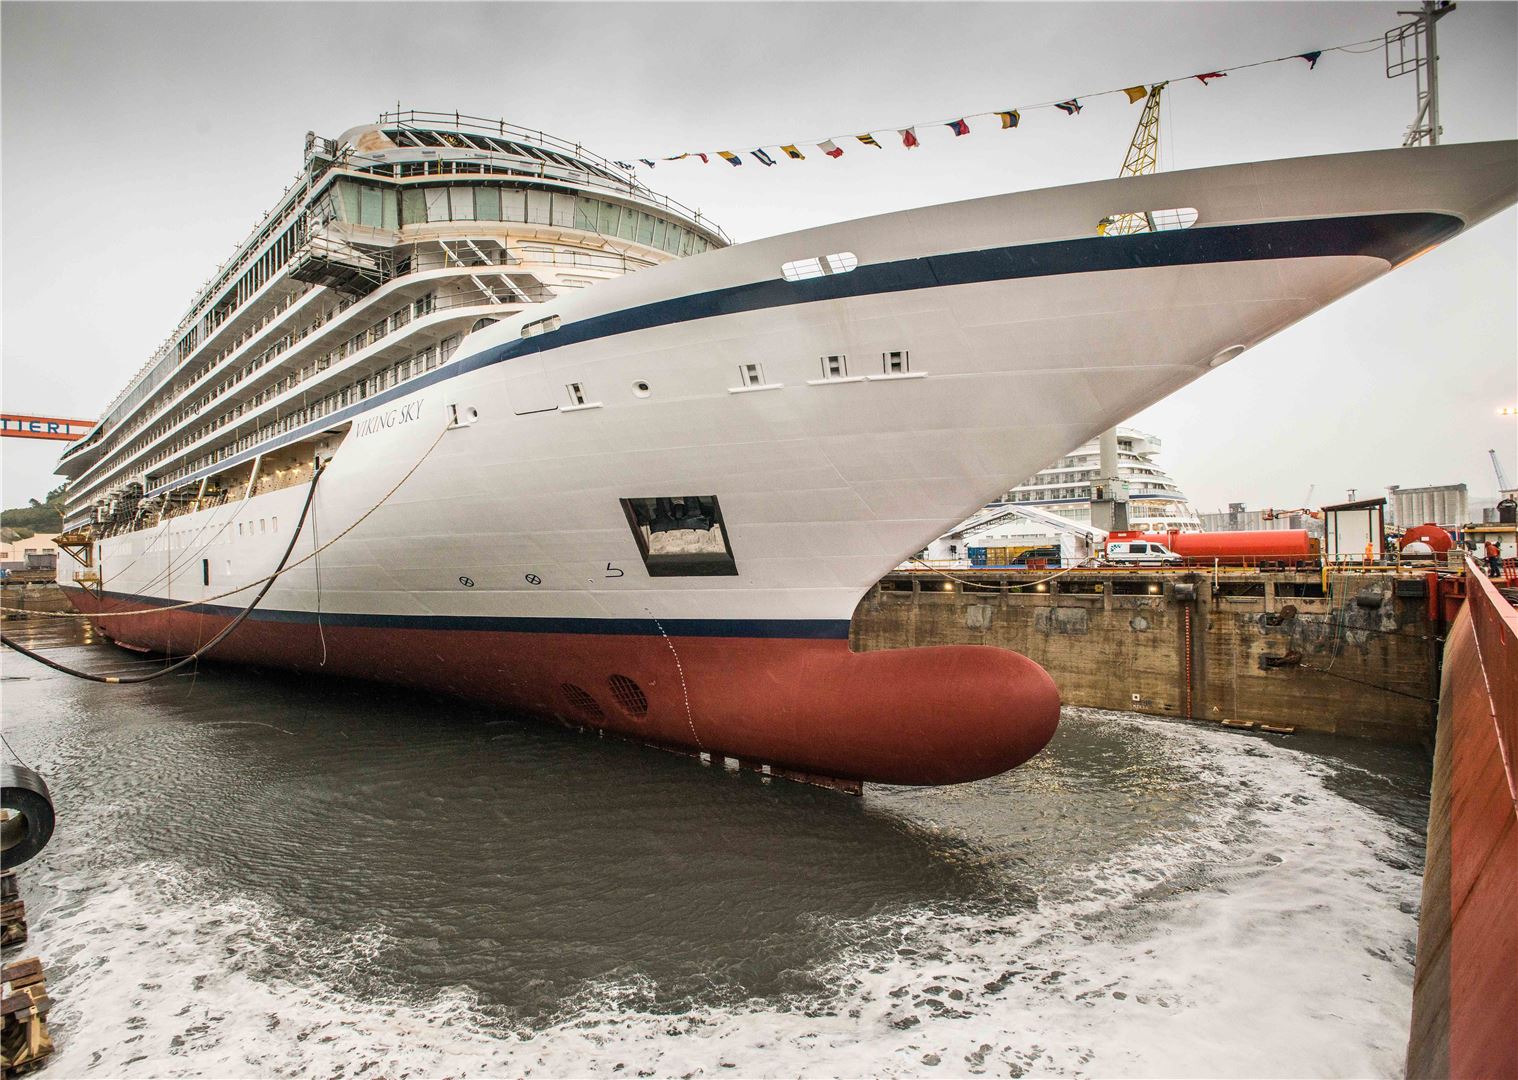 Viking Sky: All Passengers and Crew Safe After Engine Problems Stranded Ship in Norway